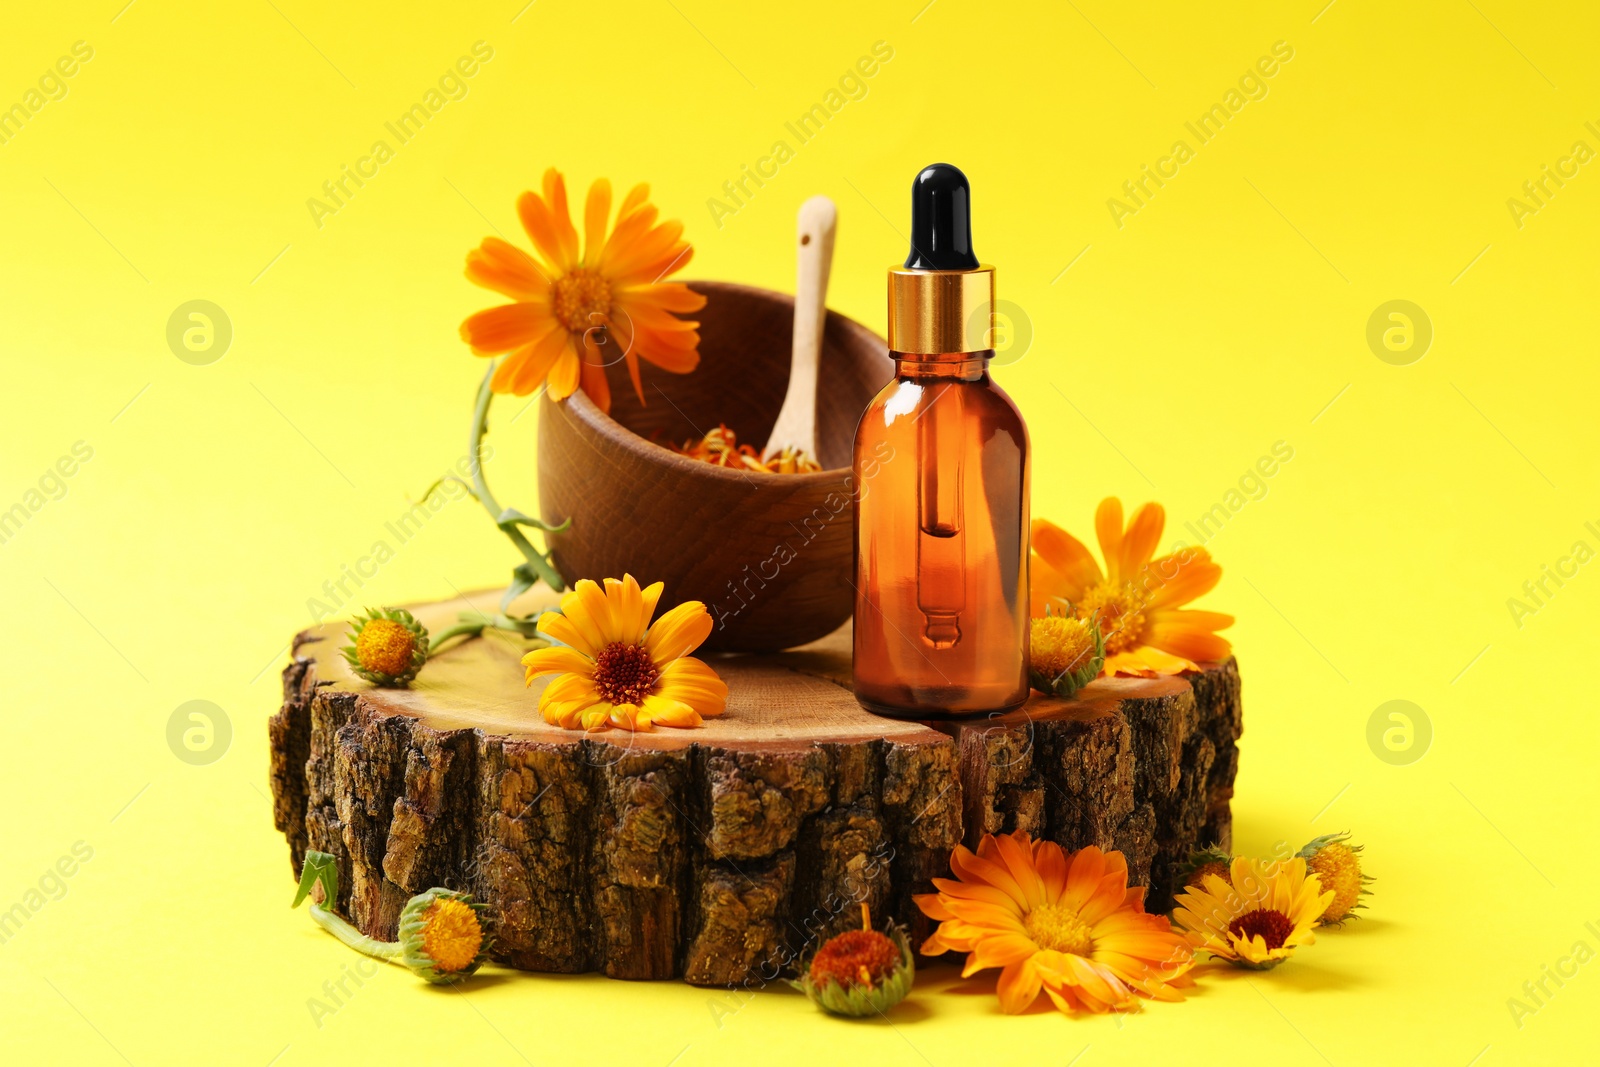 Photo of Mortar with pestle, bottle of essential oil and beautiful calendula flowers on yellow background